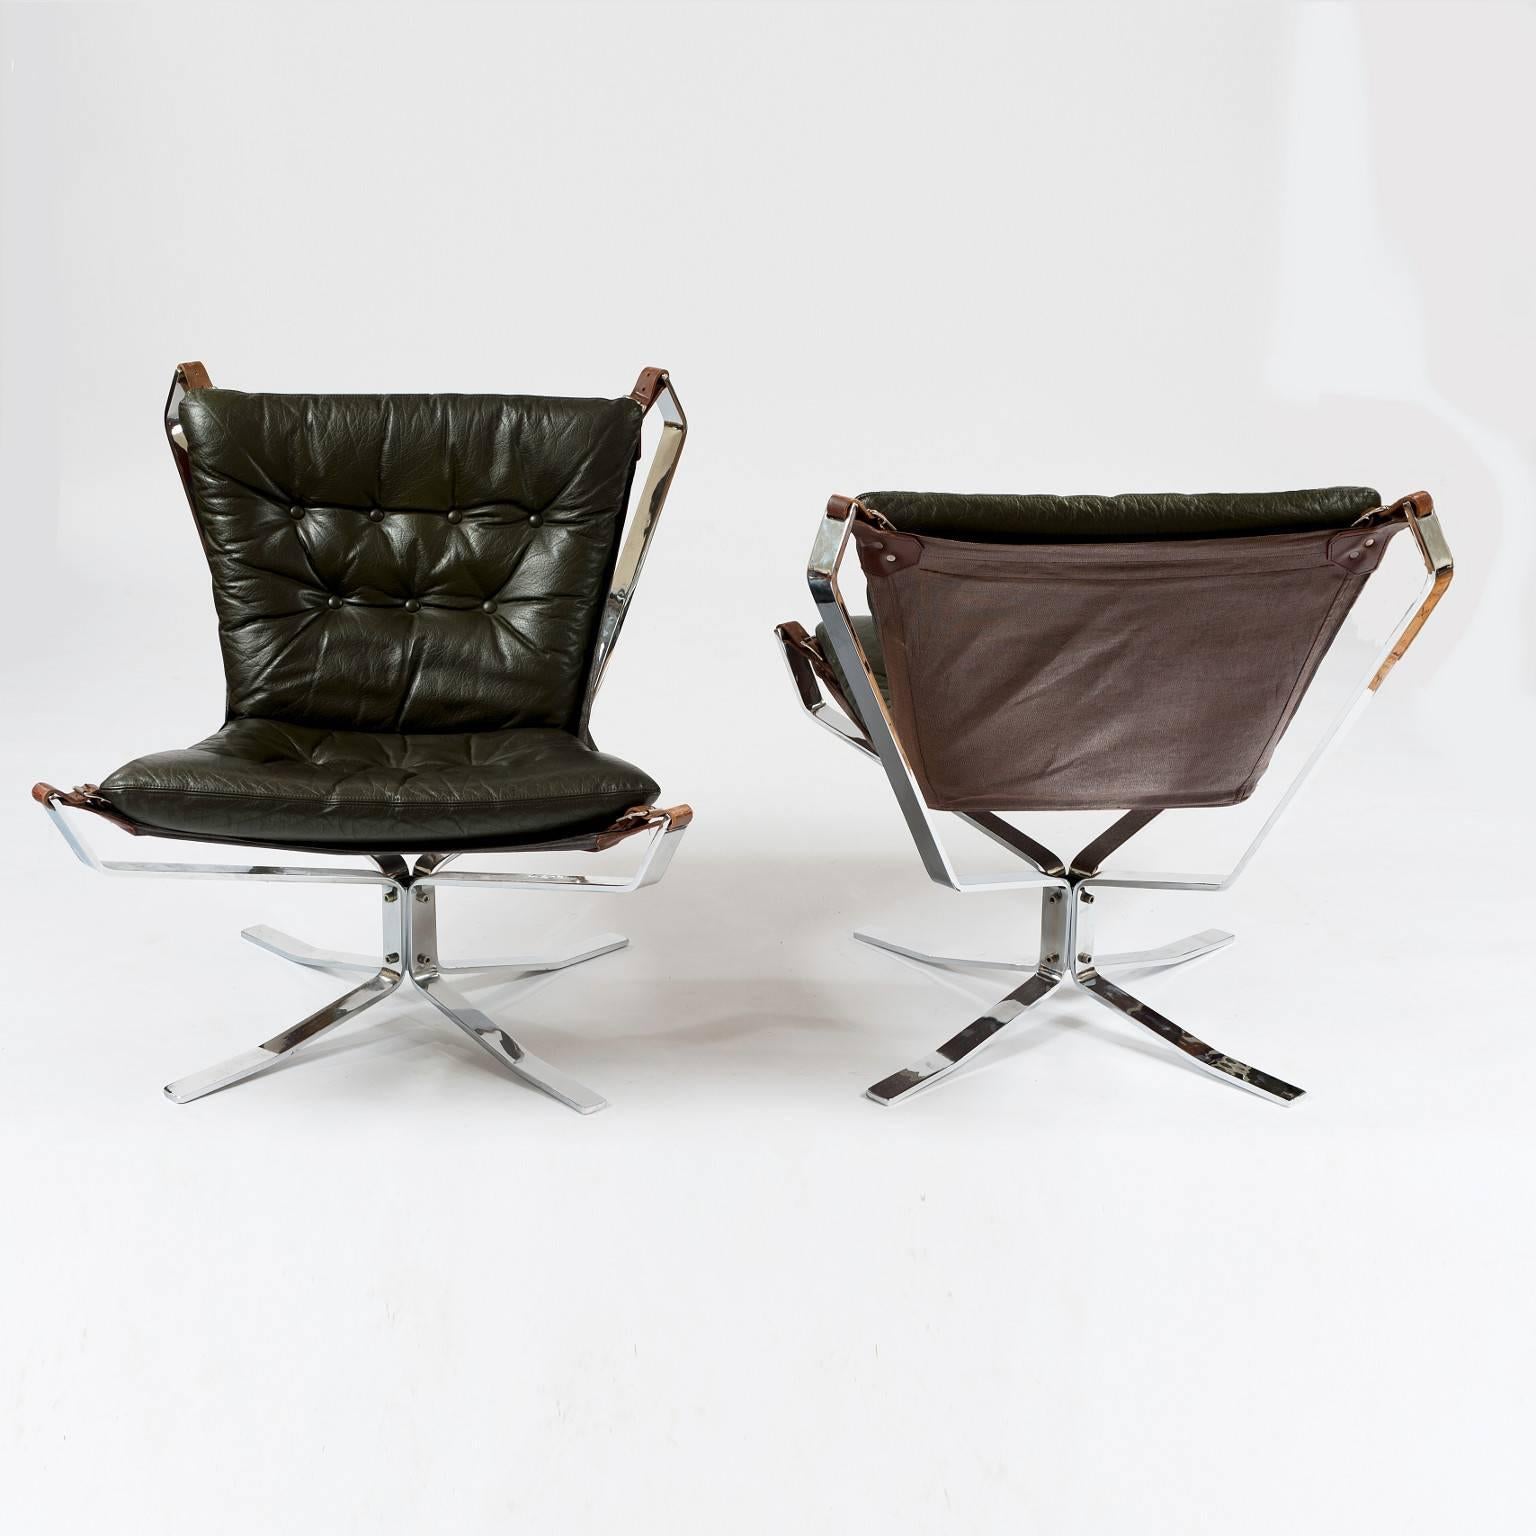 This is an original pair of chrome and leather low back lounge chairs produced in the 1970s by a Dansk Mobelfabrik Producent.

Similar to the Sigurd Ressell Falcon chair they feature a hammock-like experience as the canvas sling is attached to the